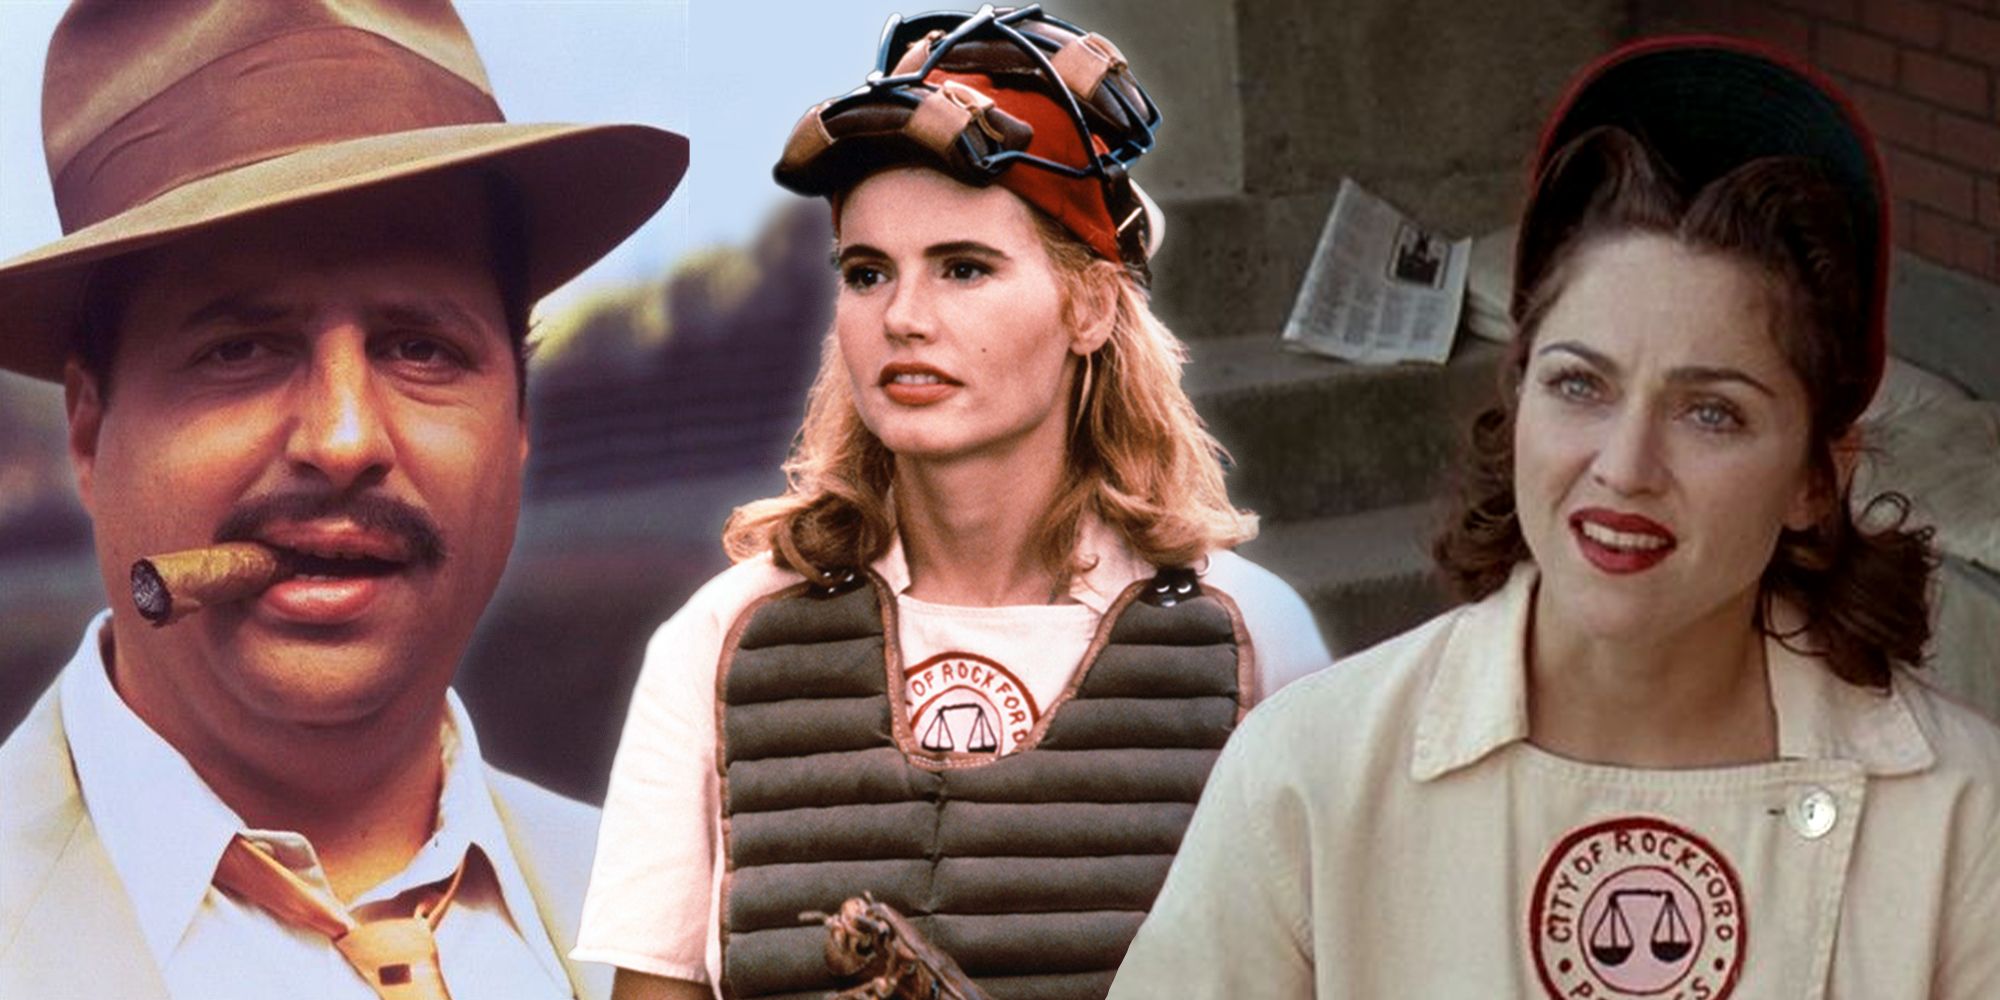 A League Of Their Own Ending Explained: Did She Drop The Ball On